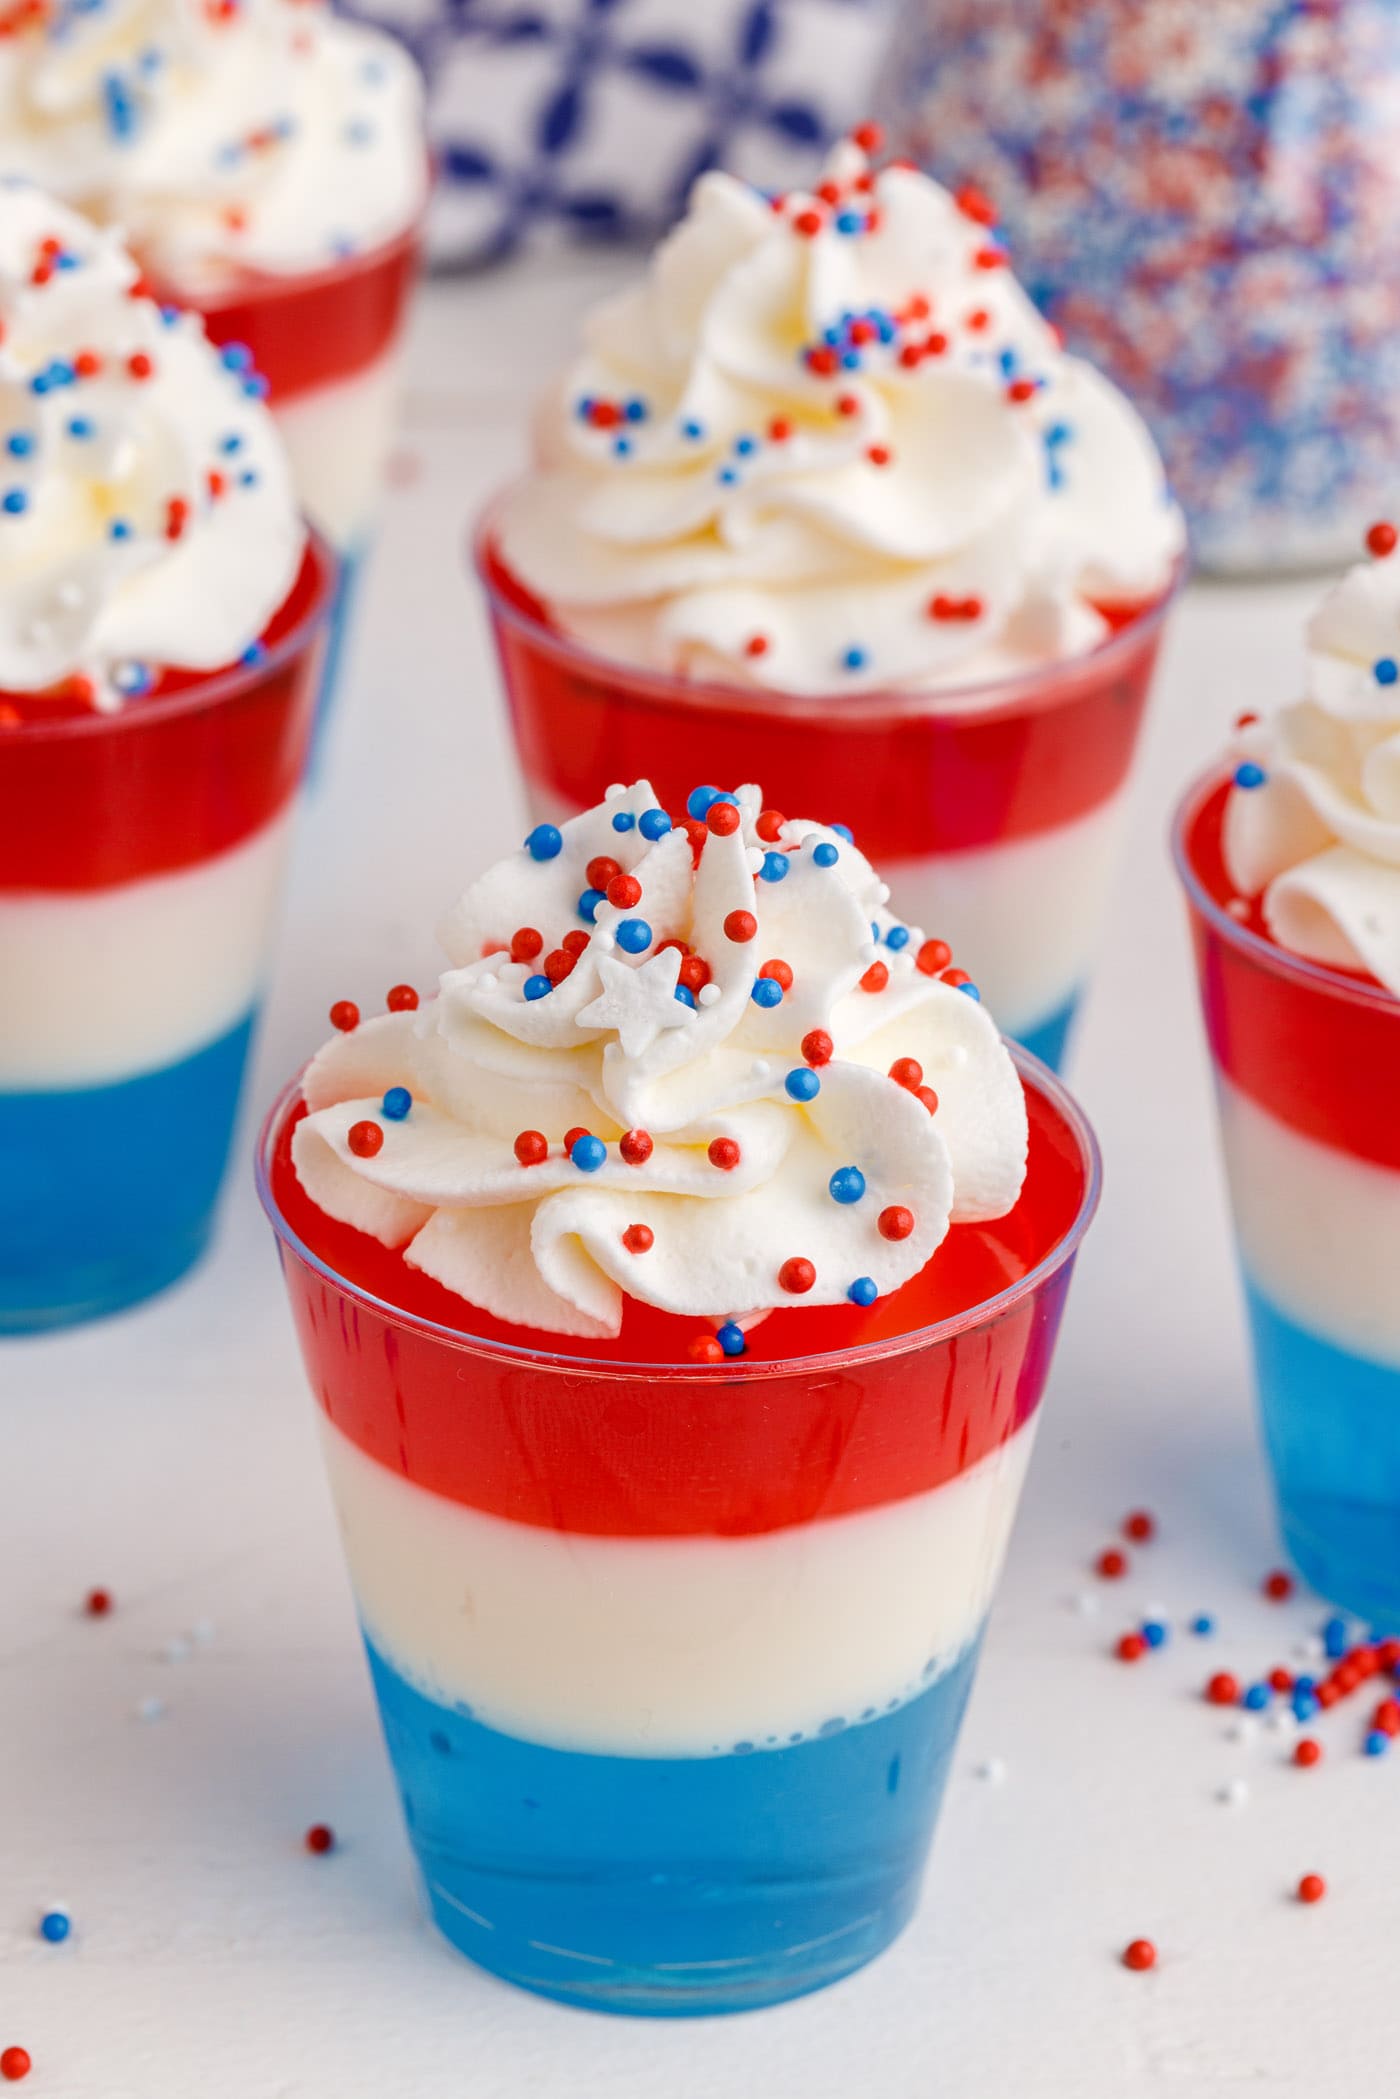 Make the 4th of July Pop with Jello Shots